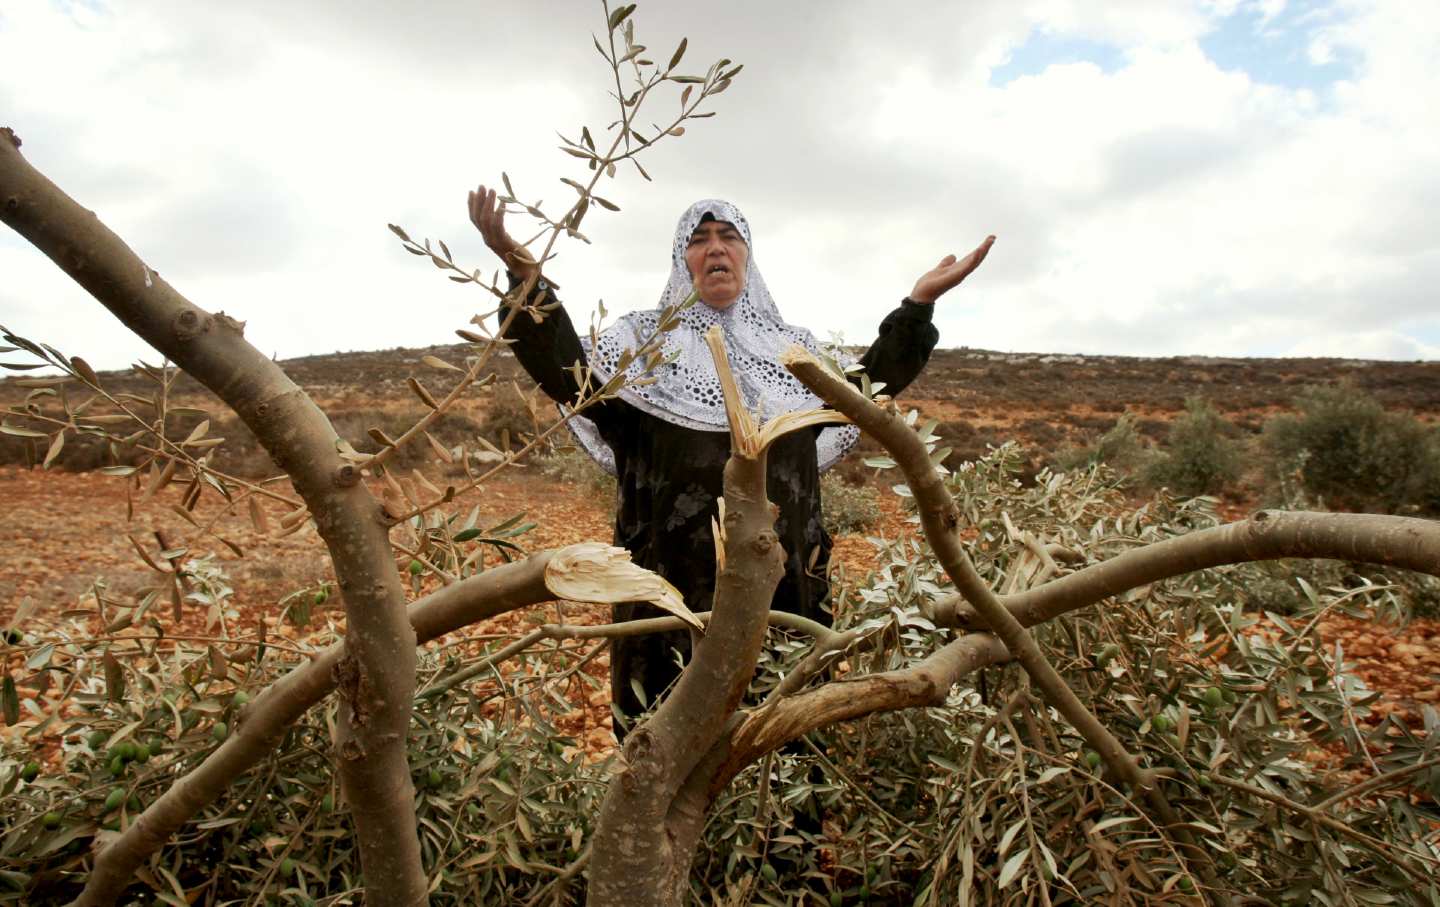 A Palestinian woman gestures next to a damaged olive tree in the village of Qusra in the northern West Bank in October 2011.